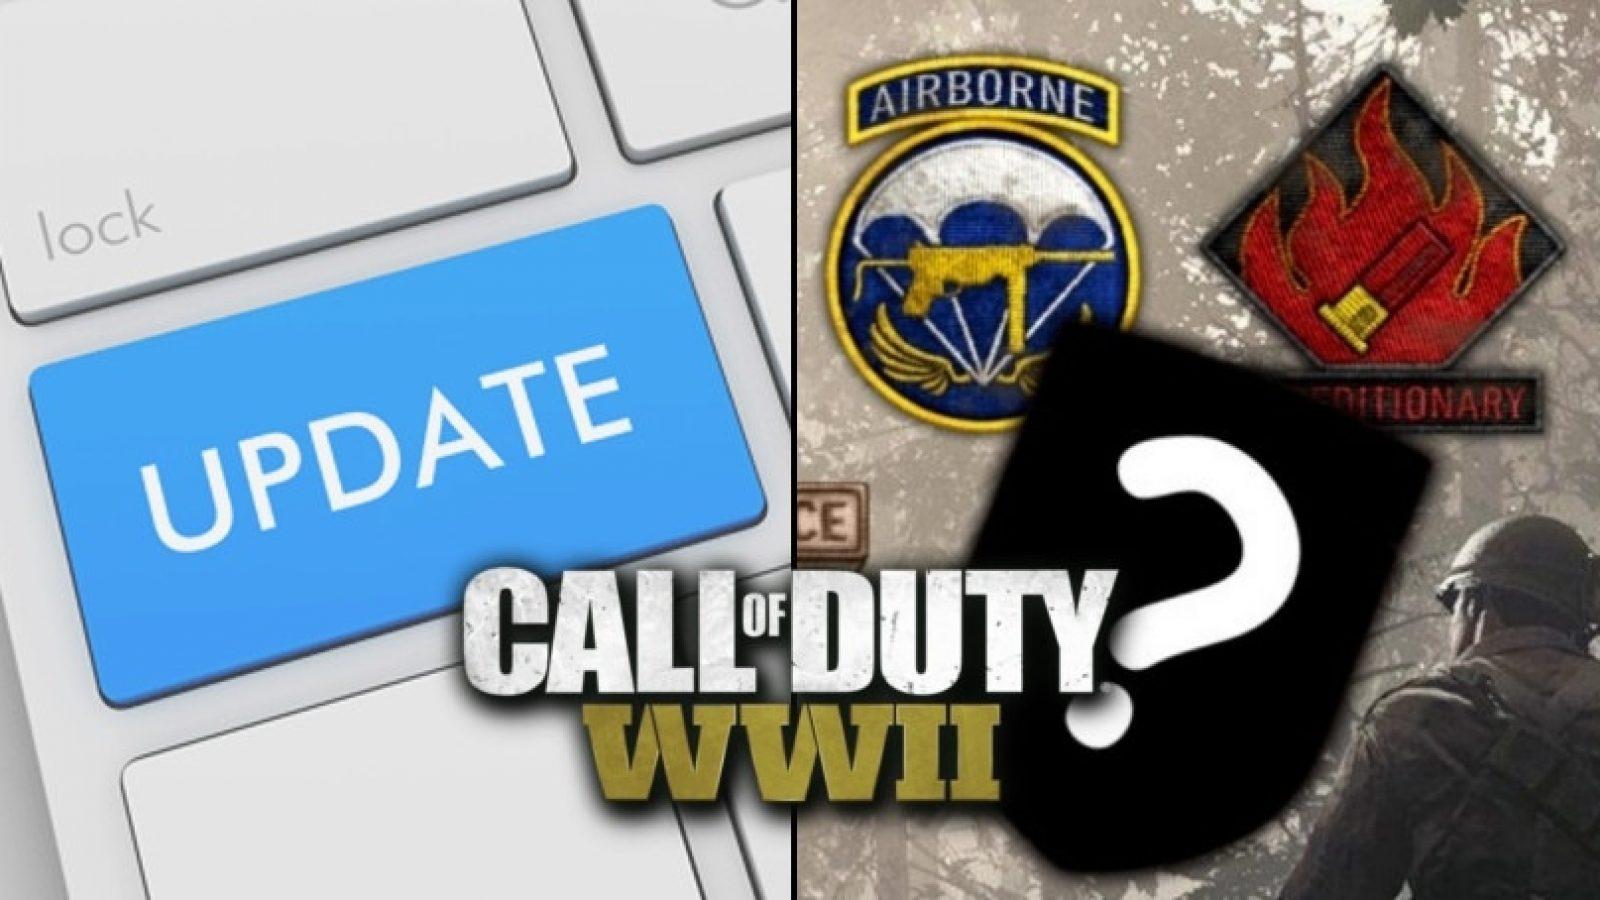 Call of Duty WWII Game, PS4, PC, Xbox One, Zombies, Reddit, Tips